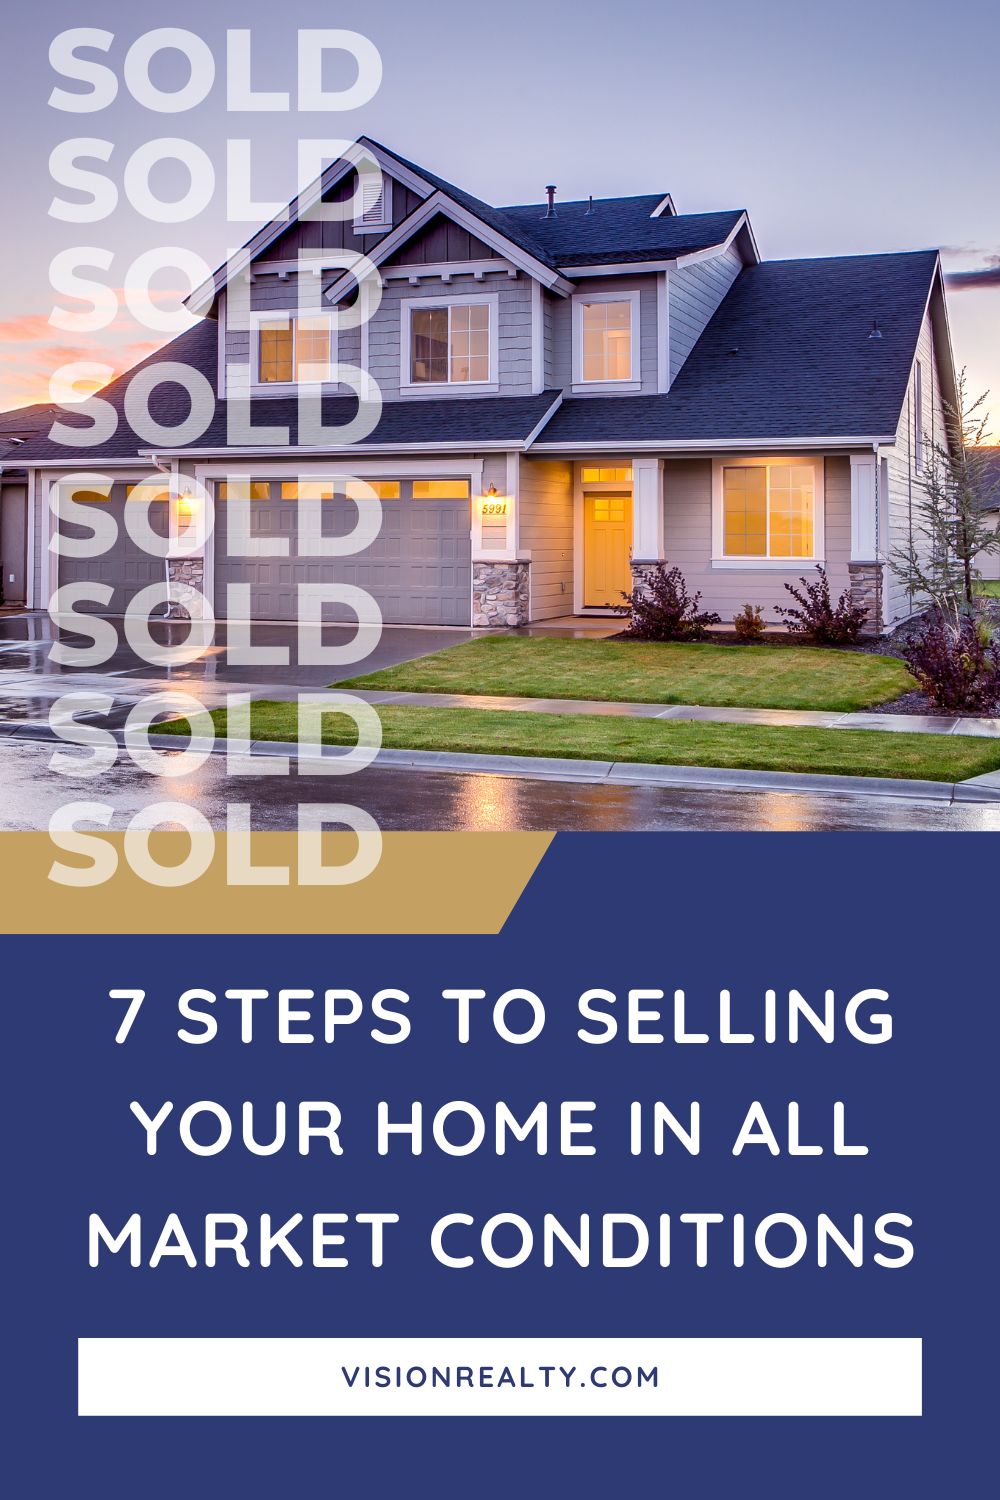 7 Steps to Selling Your Home In All Market Conditions